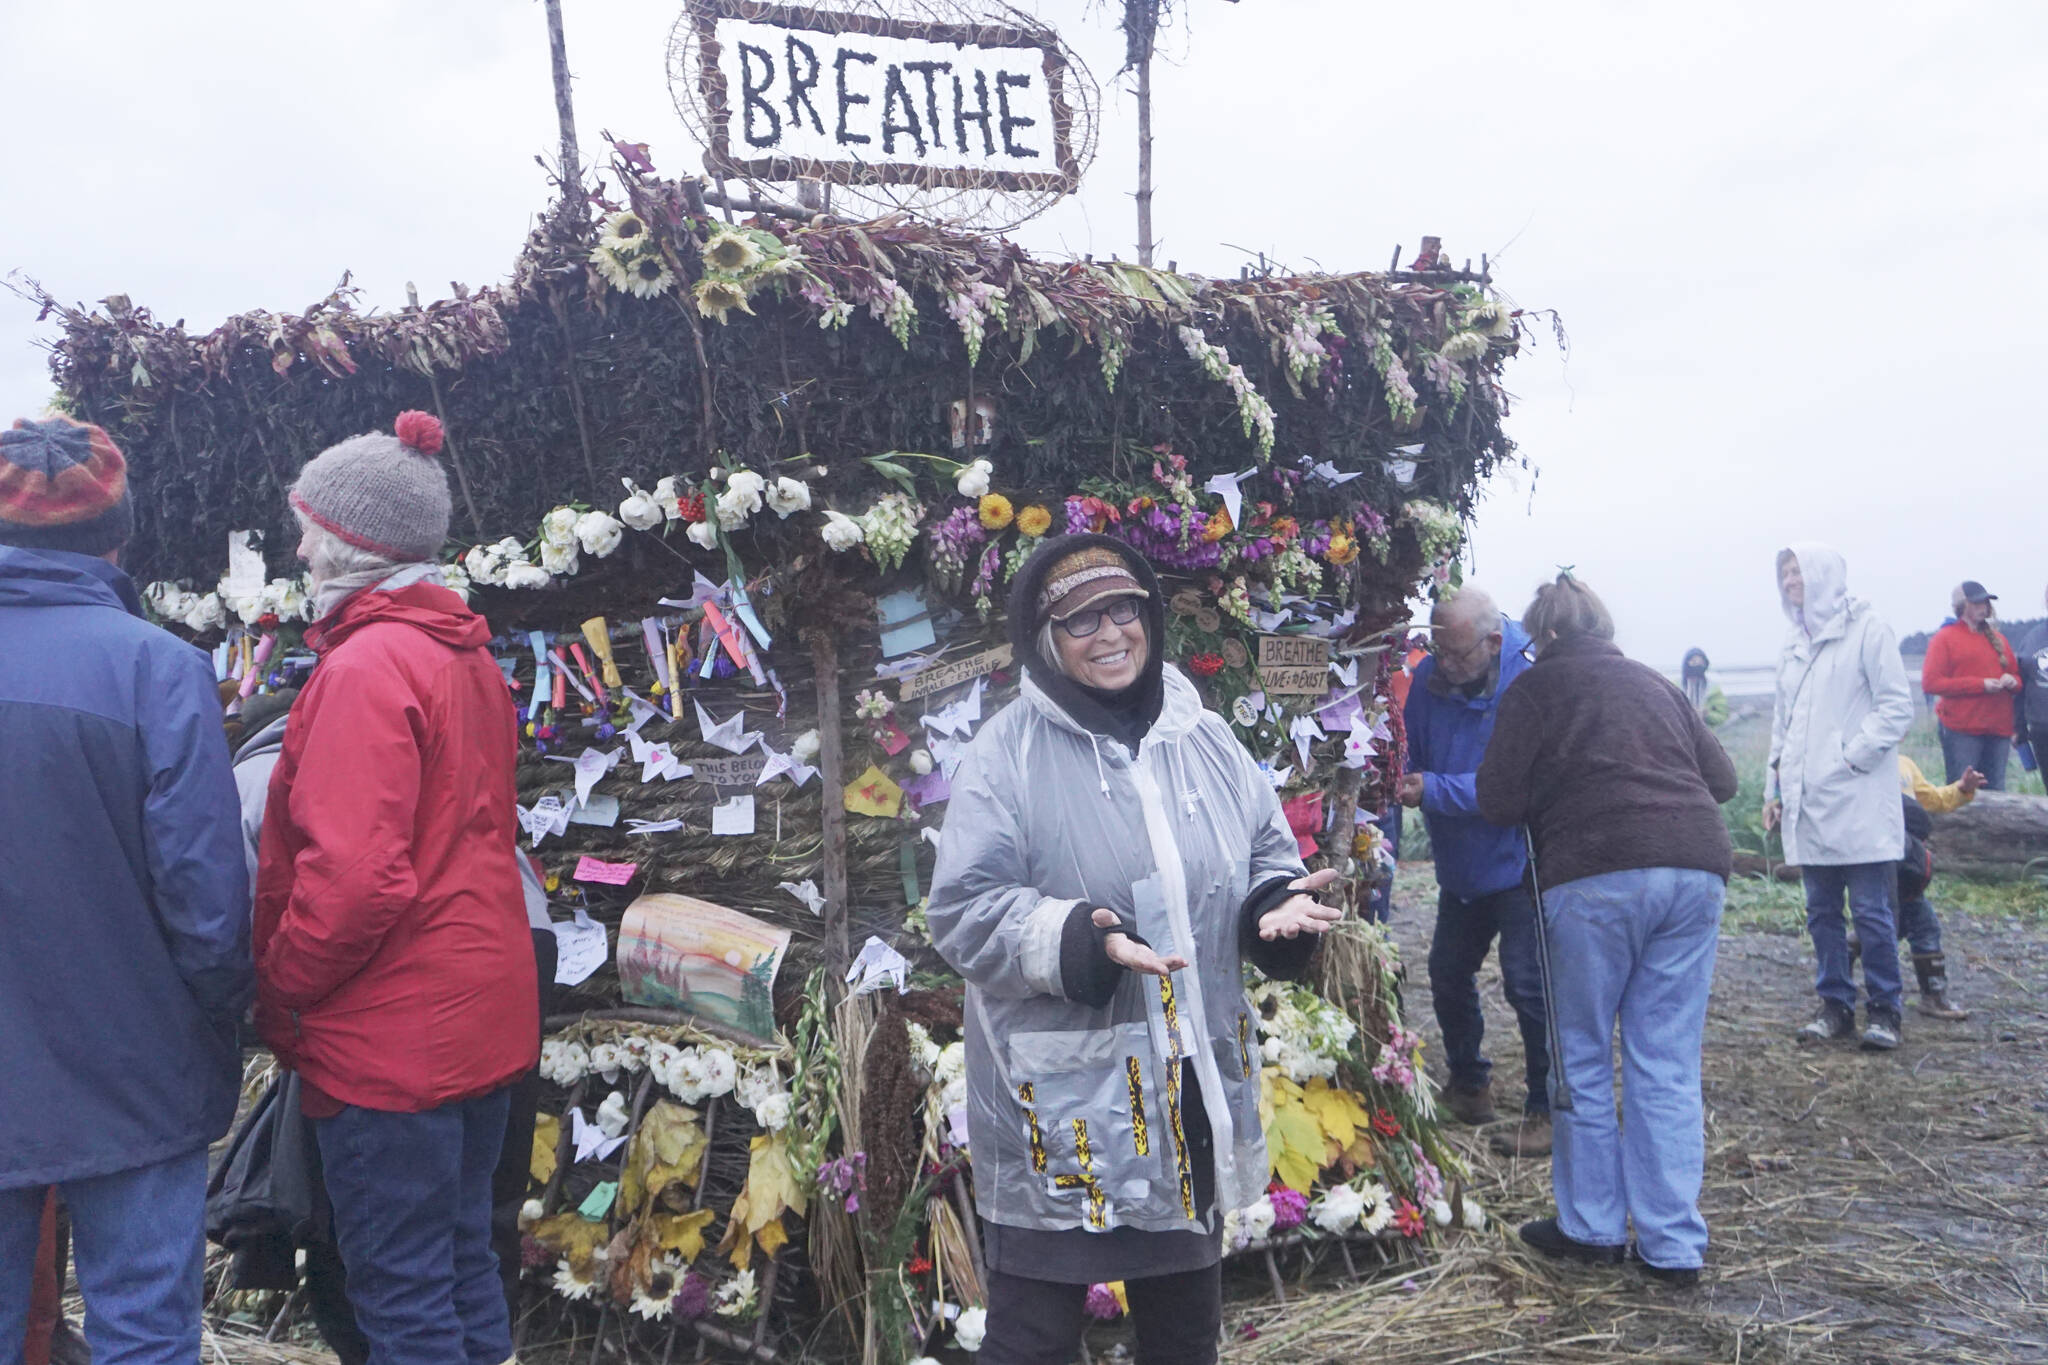 Burning Basket coordinator Mavis Muller stands in front of the 19th annual Burning Basket, “Breathe,” on Sunday, Sept. 11, 2022, at Mariner Park on the Homer Spit in Homer, Alaska. (Photo by Michael Armstrong/Homer News)